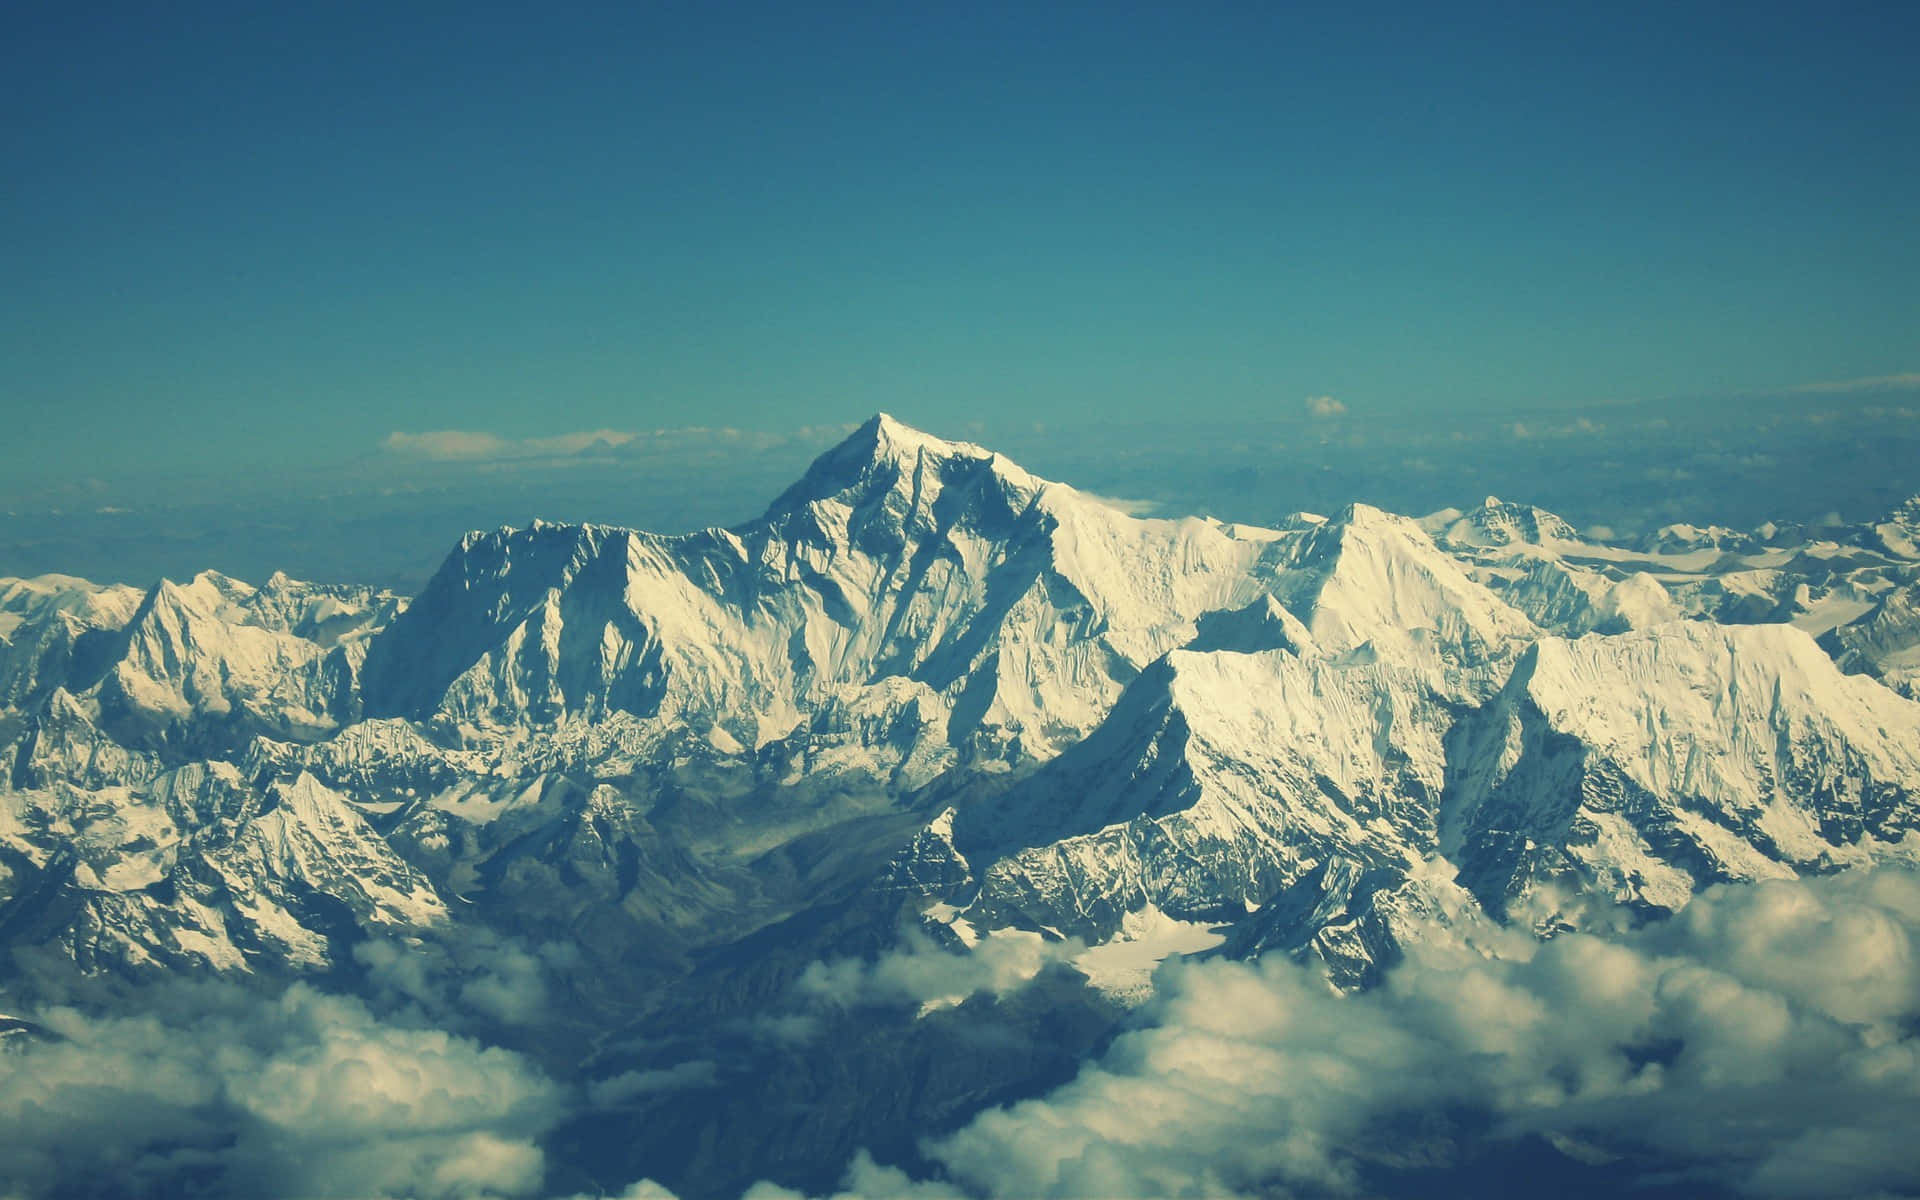 A spectacular shot of the picturesque Himalaya range